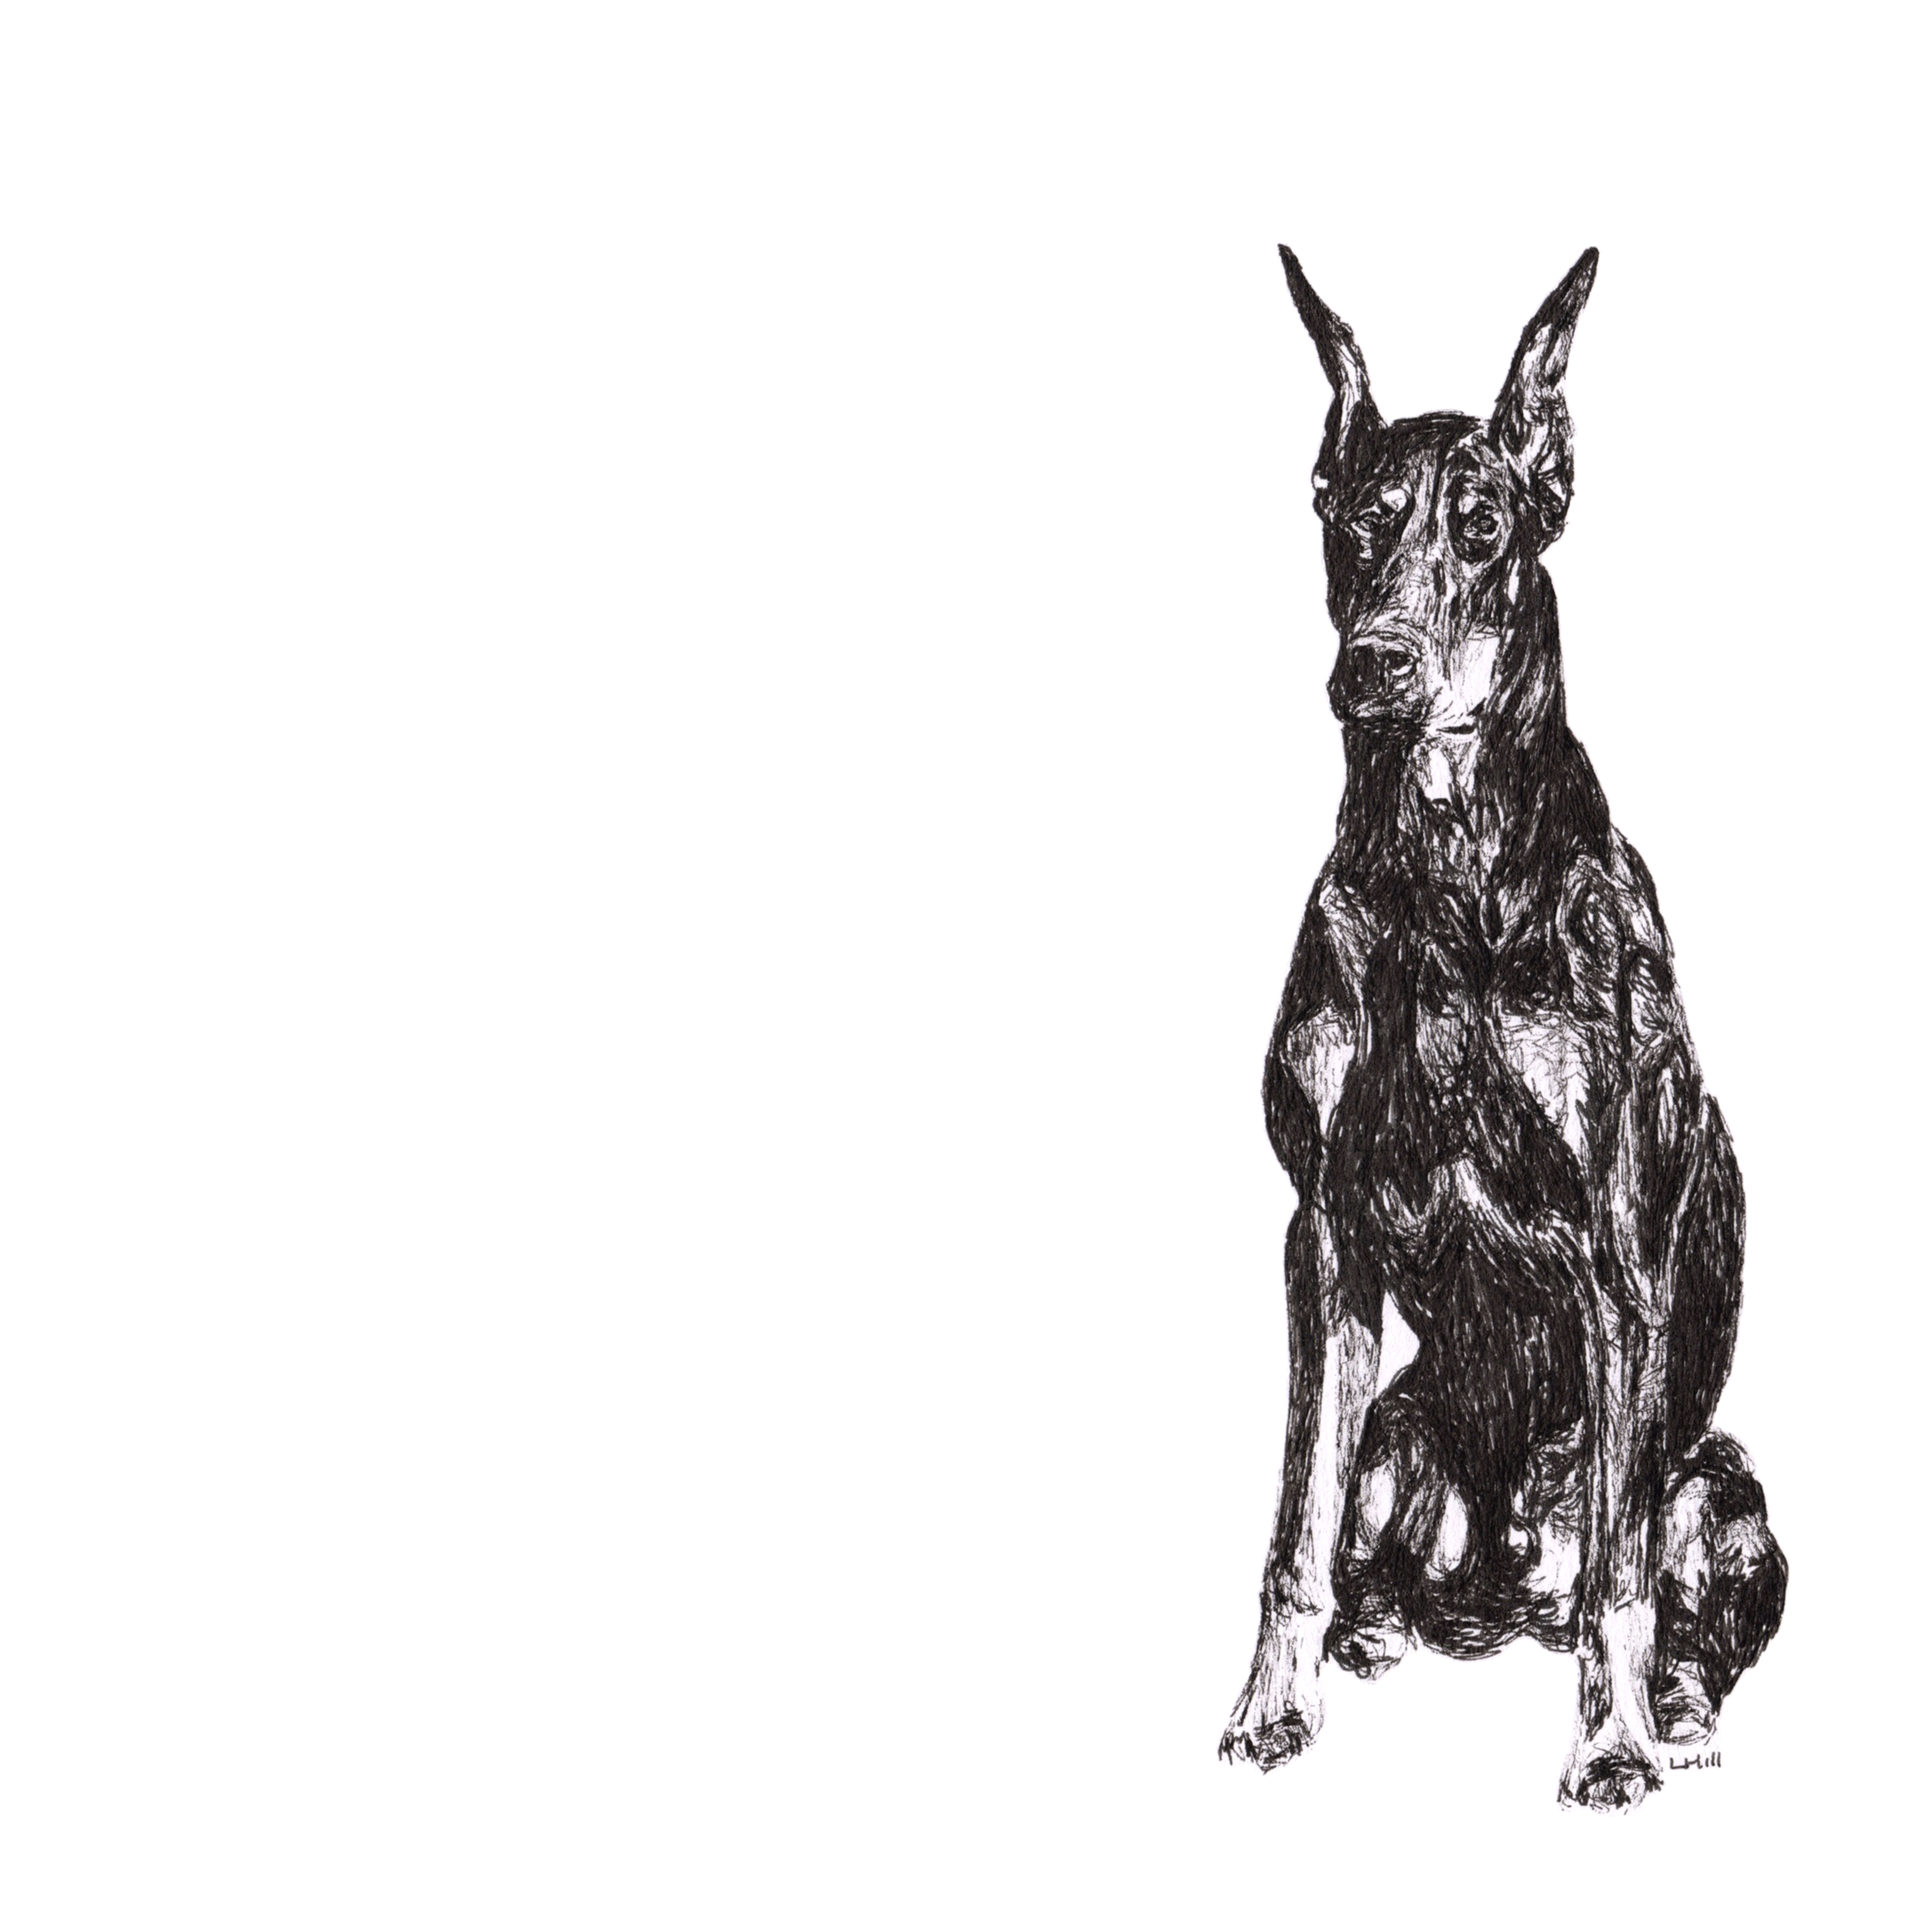 Doberman Pinscher pen and ink illustration by Louisa Hill